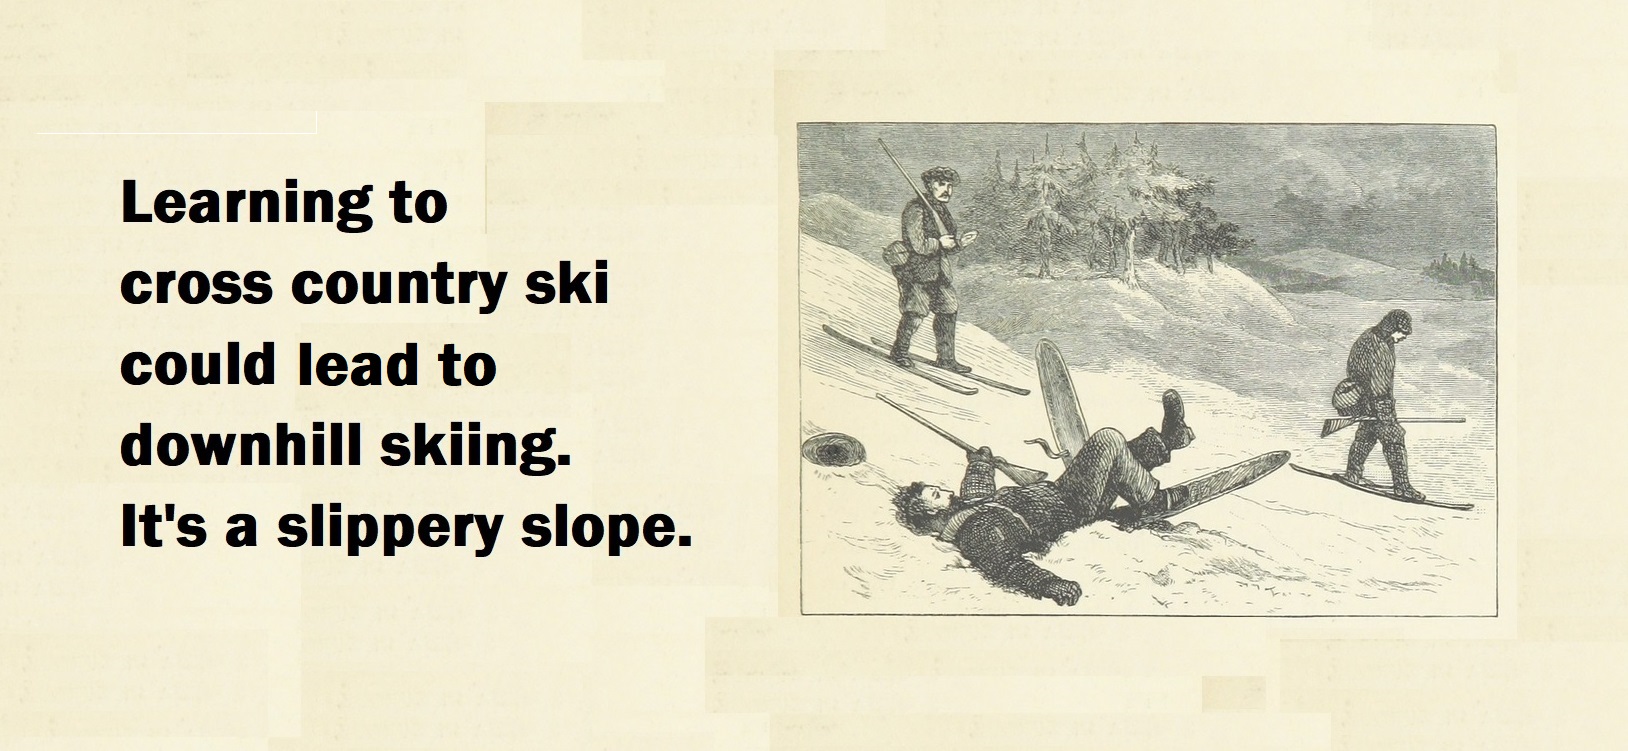 Learning to cross-country ski could learn to downhill skiing. It's a slippery slope.